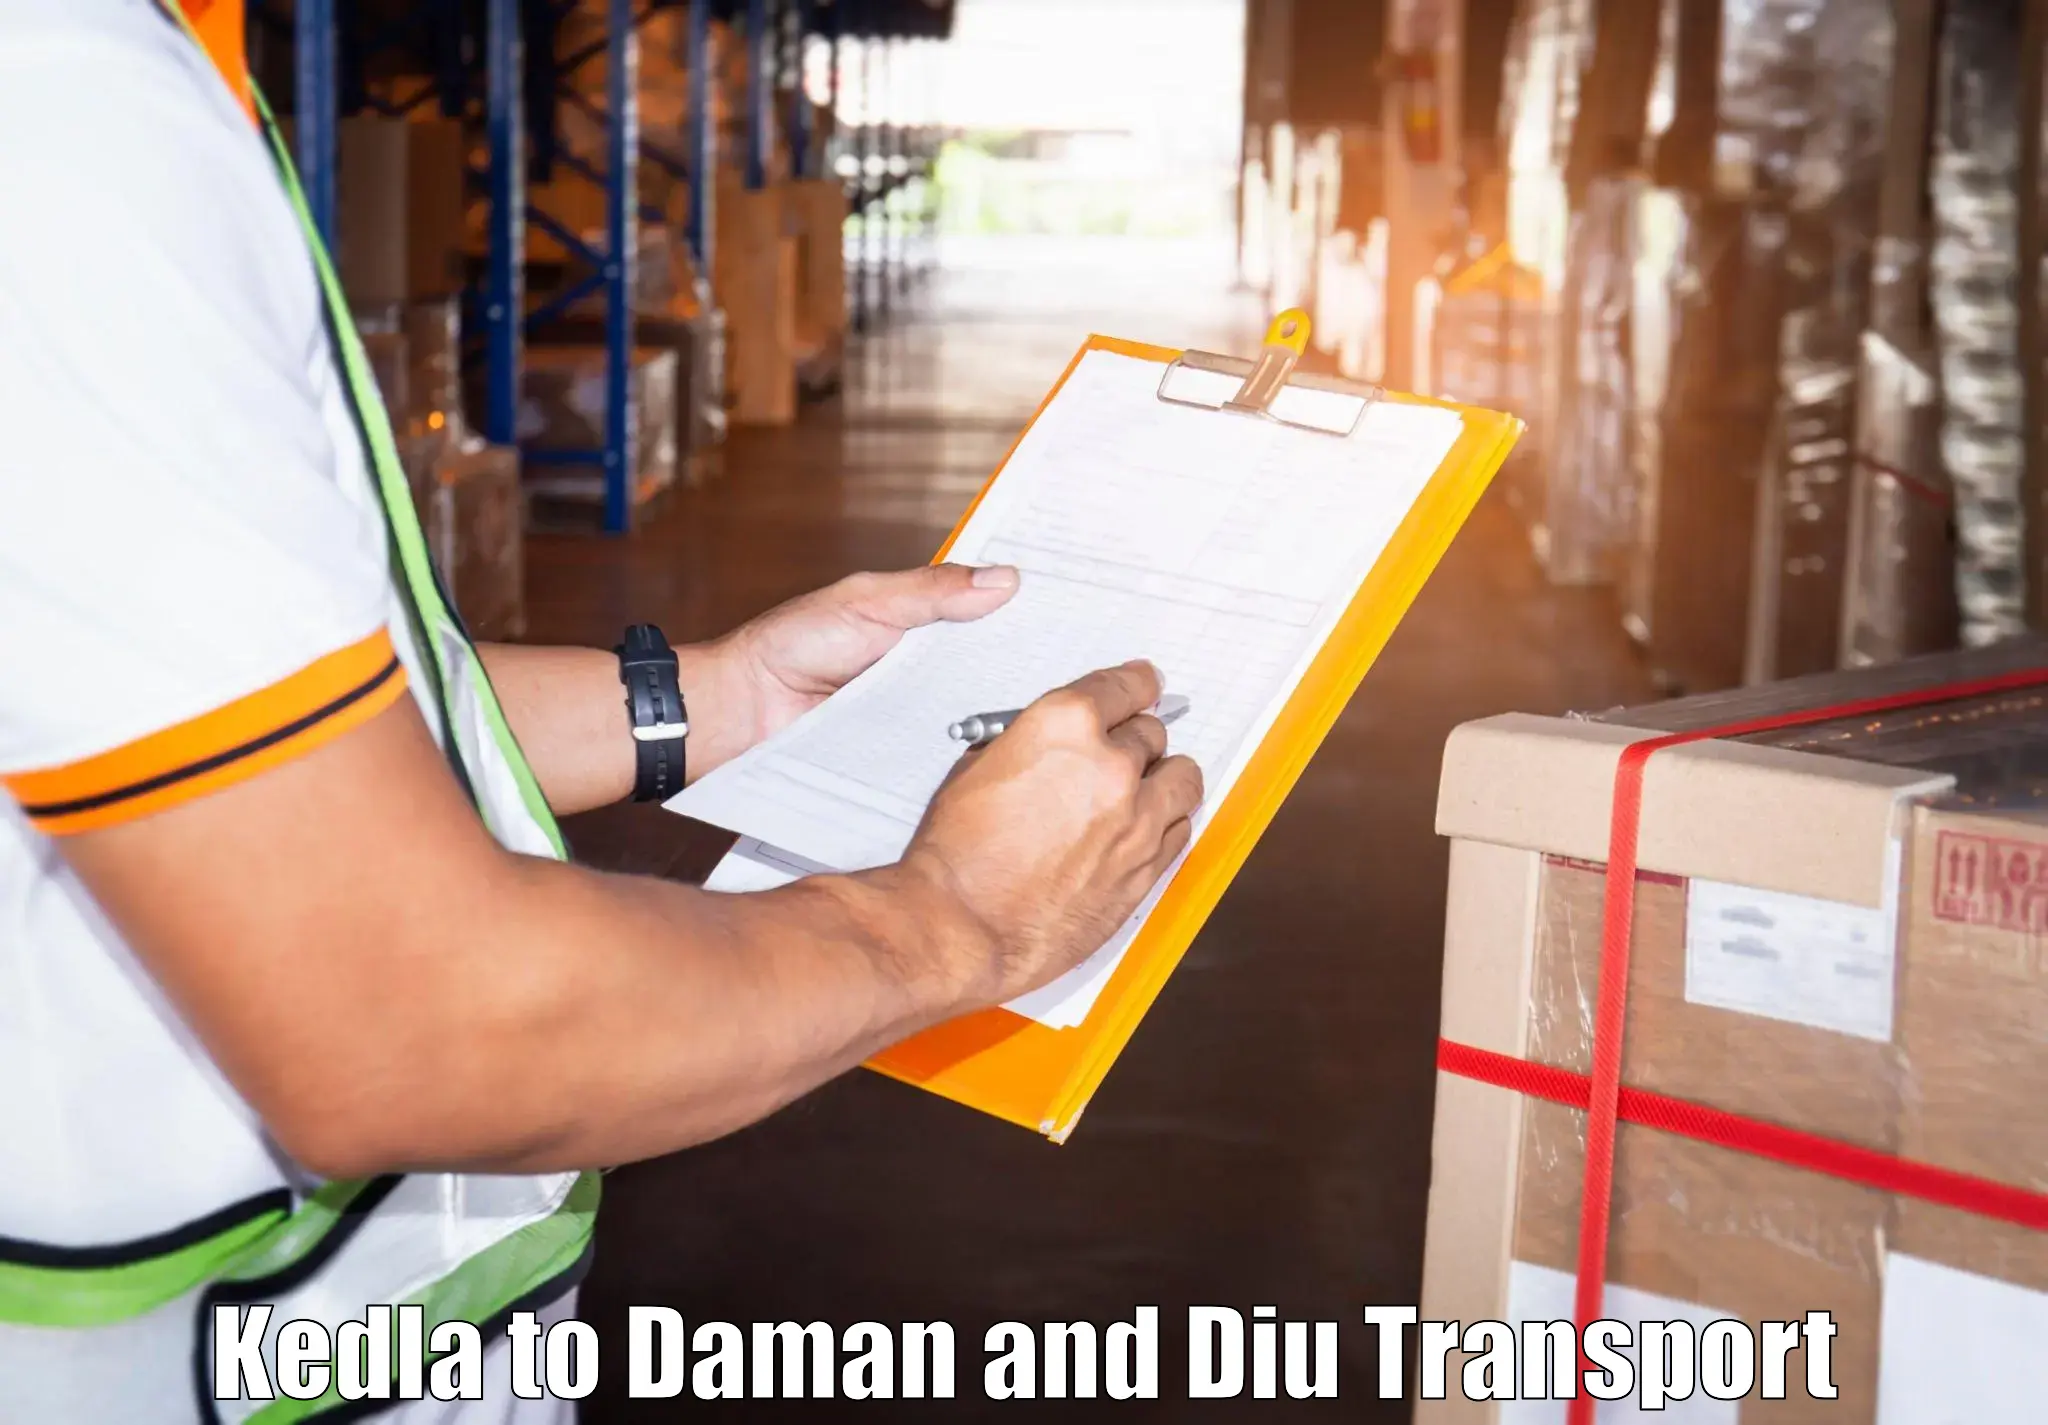 Two wheeler transport services Kedla to Daman and Diu